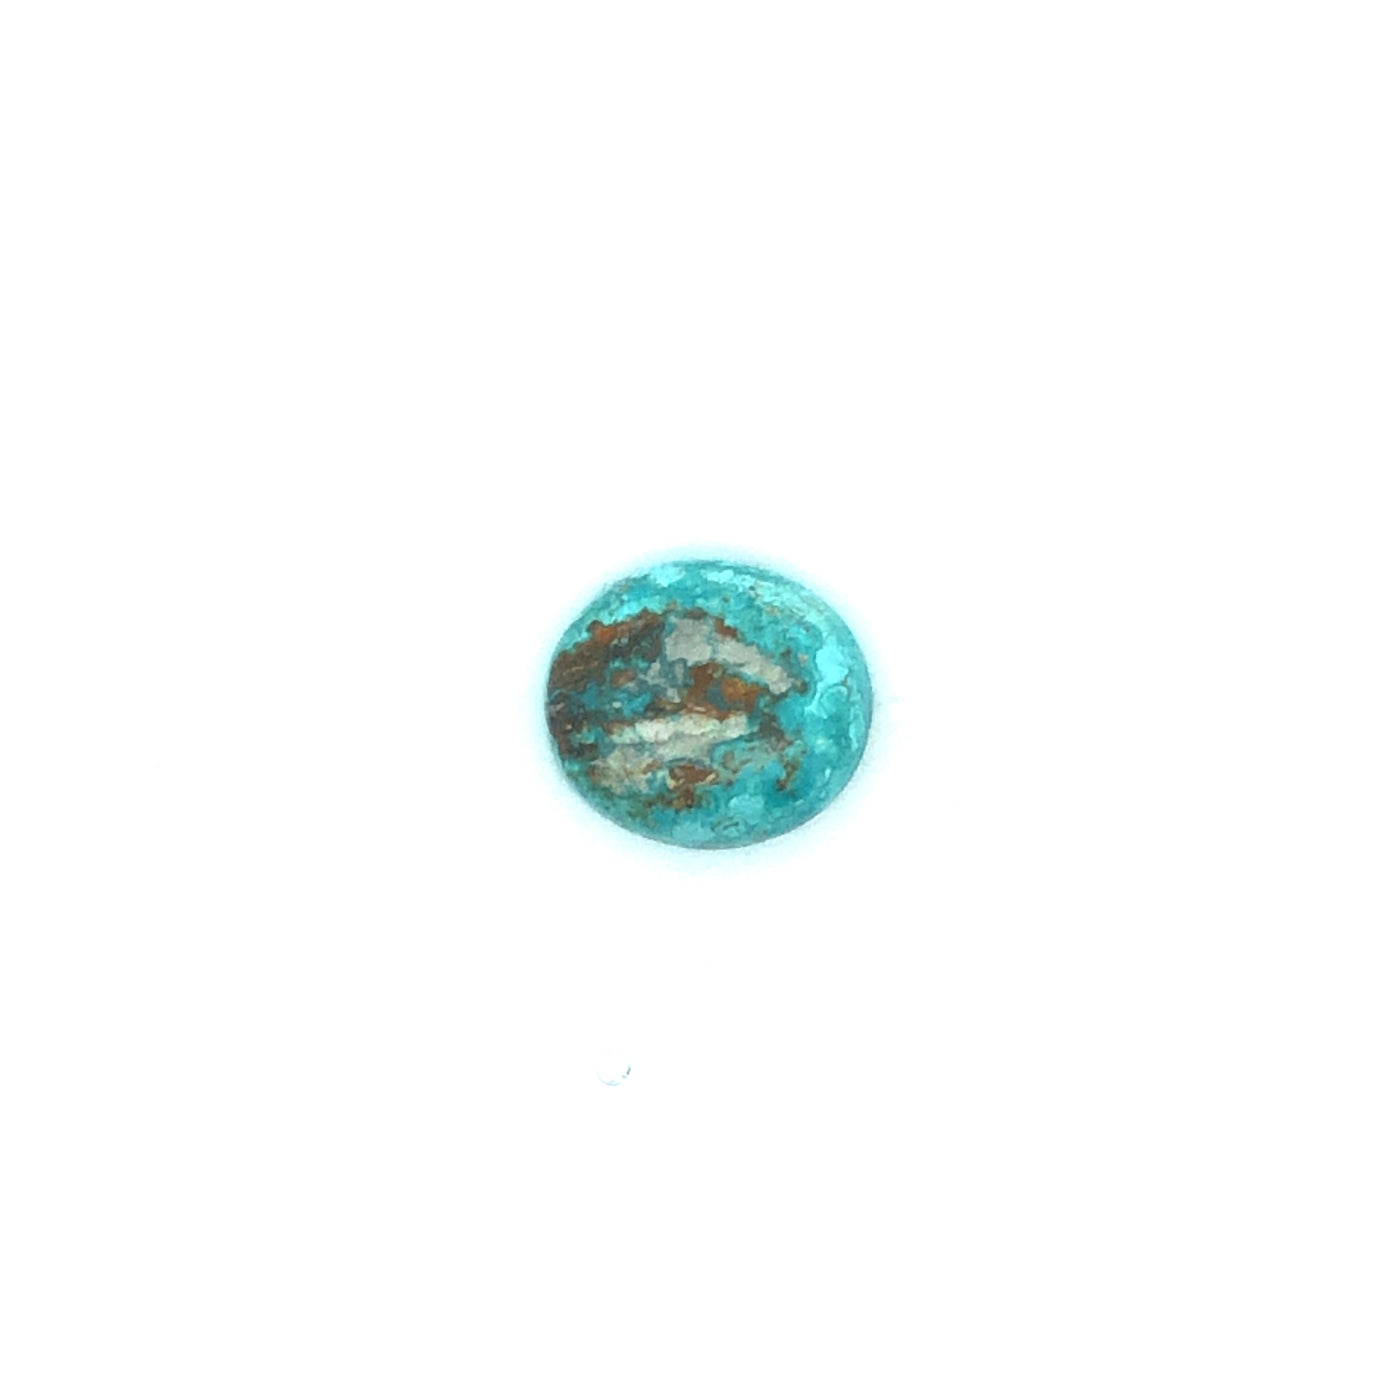 Loose Narooma Turquoise Oval Shaped 7.64Ct Blue With Some Brown/White